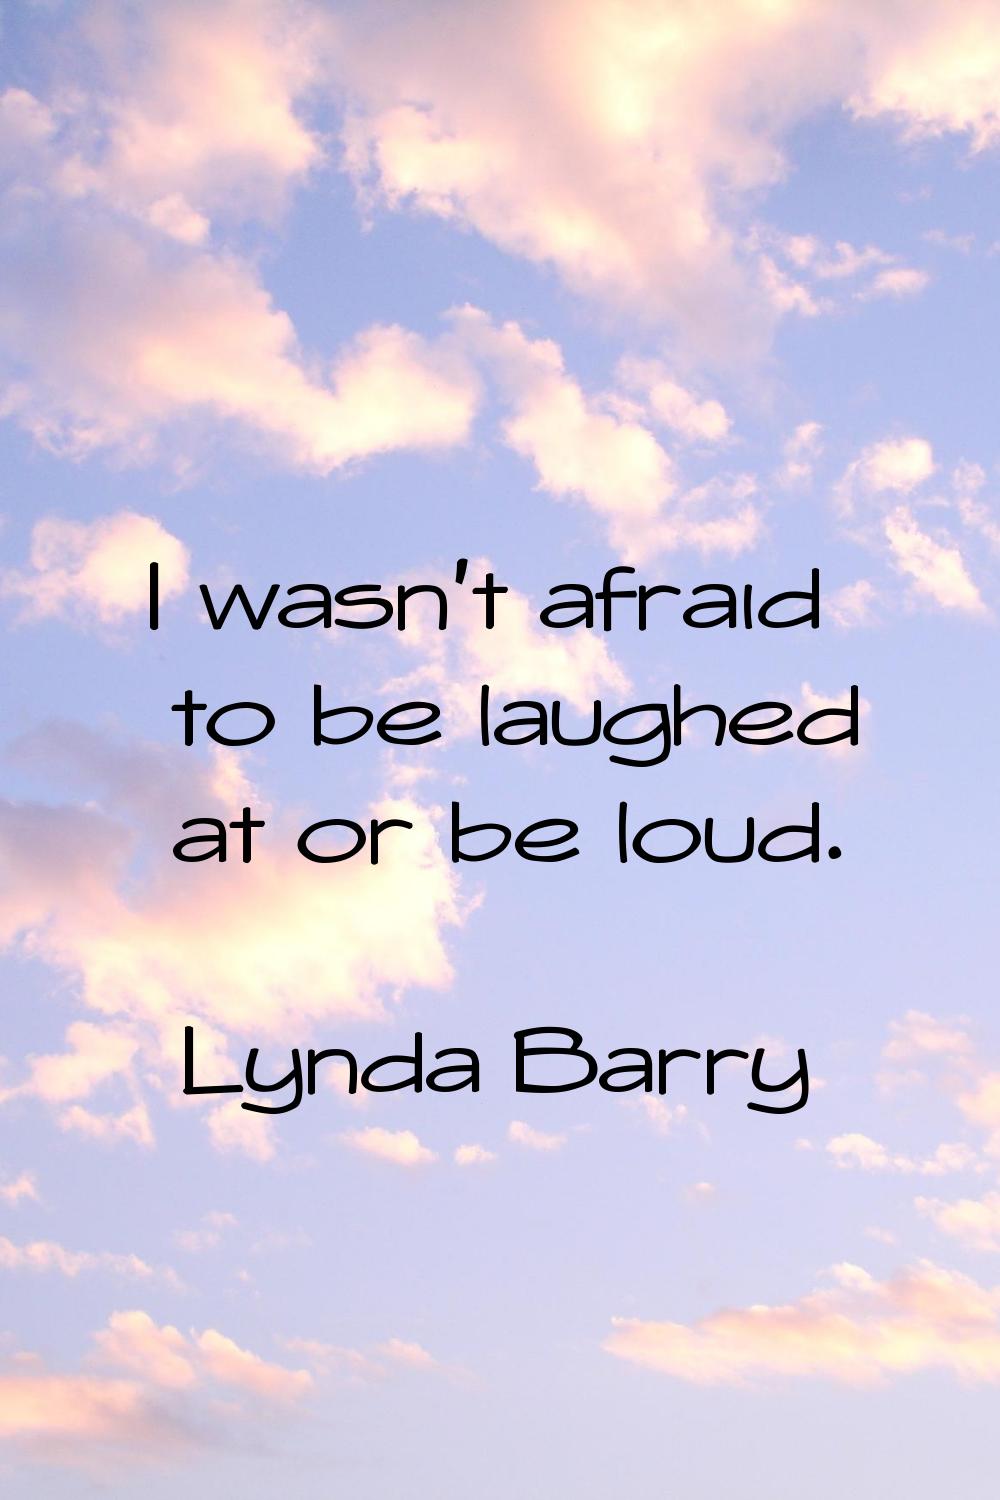 I wasn't afraid to be laughed at or be loud.